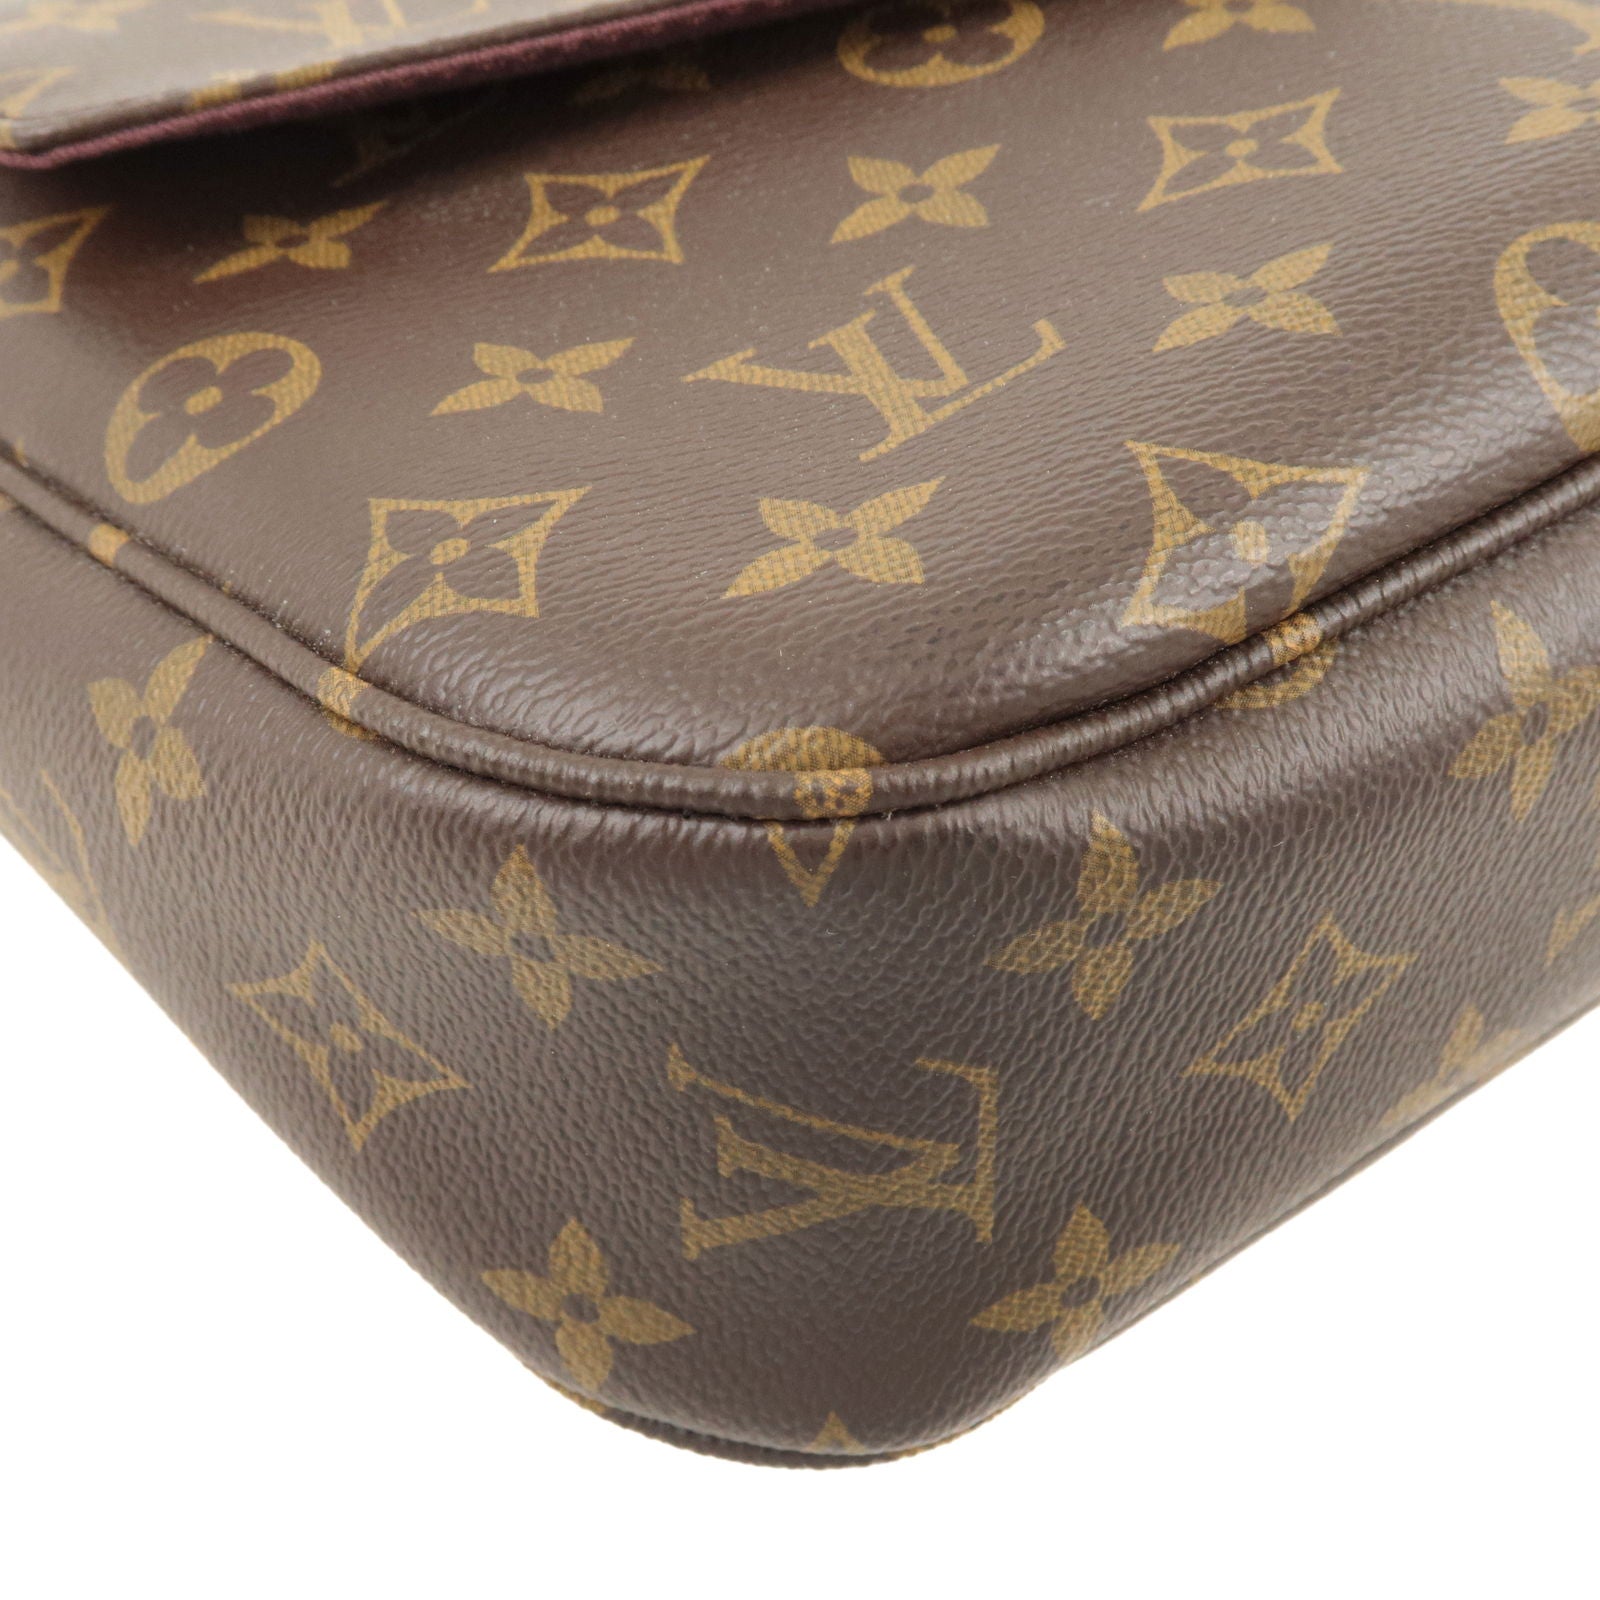 The Louis Vuitton Pont 9 is the shoulder bag we have been waiting